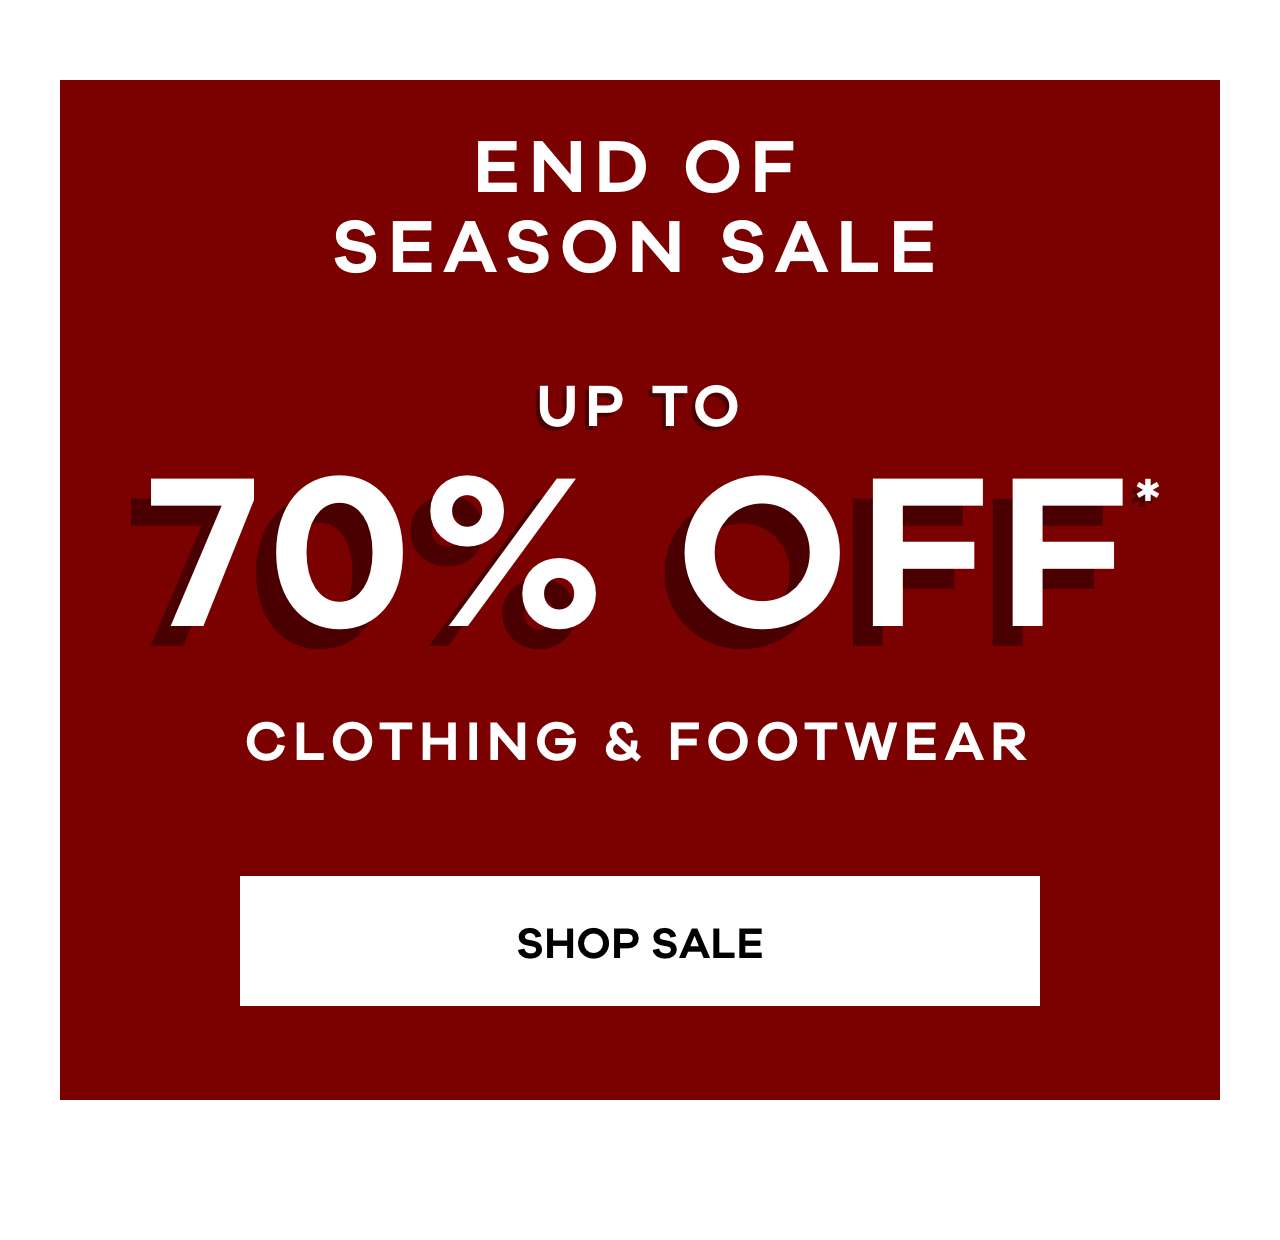 End of season sale. Up to 70% off* clothing and footwear. Shop sale